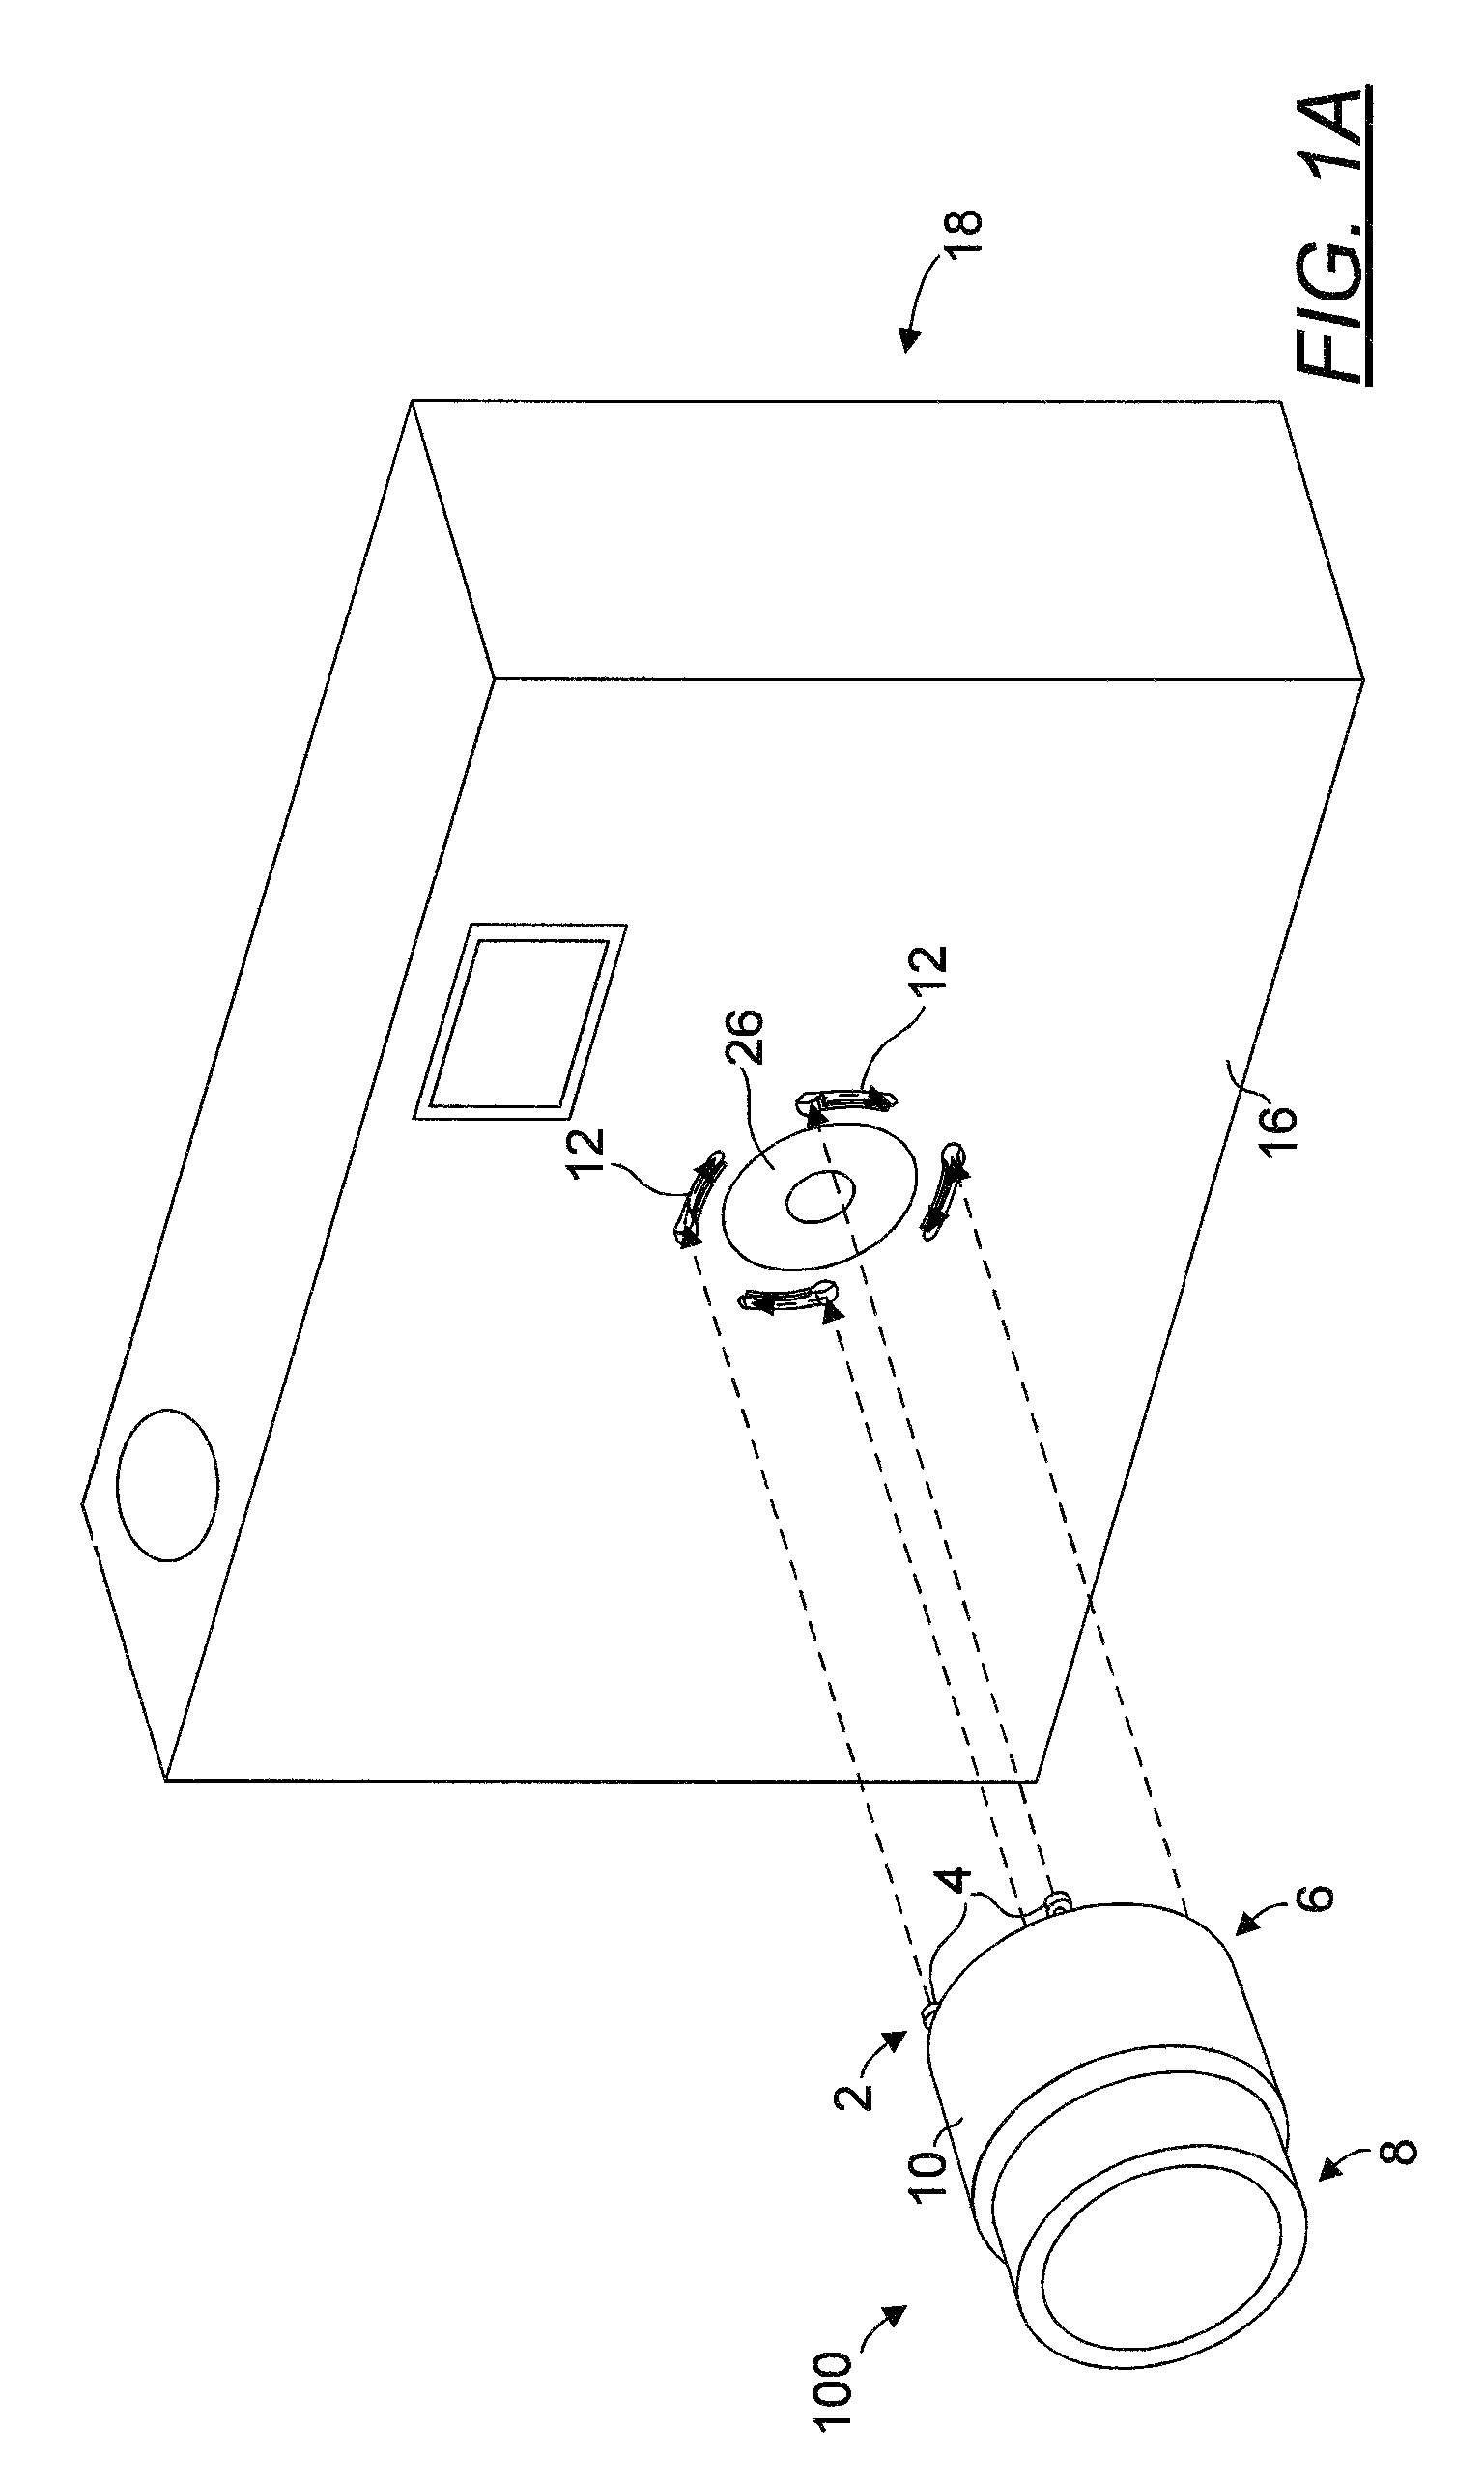 Lens and display accessory for portable imaging device